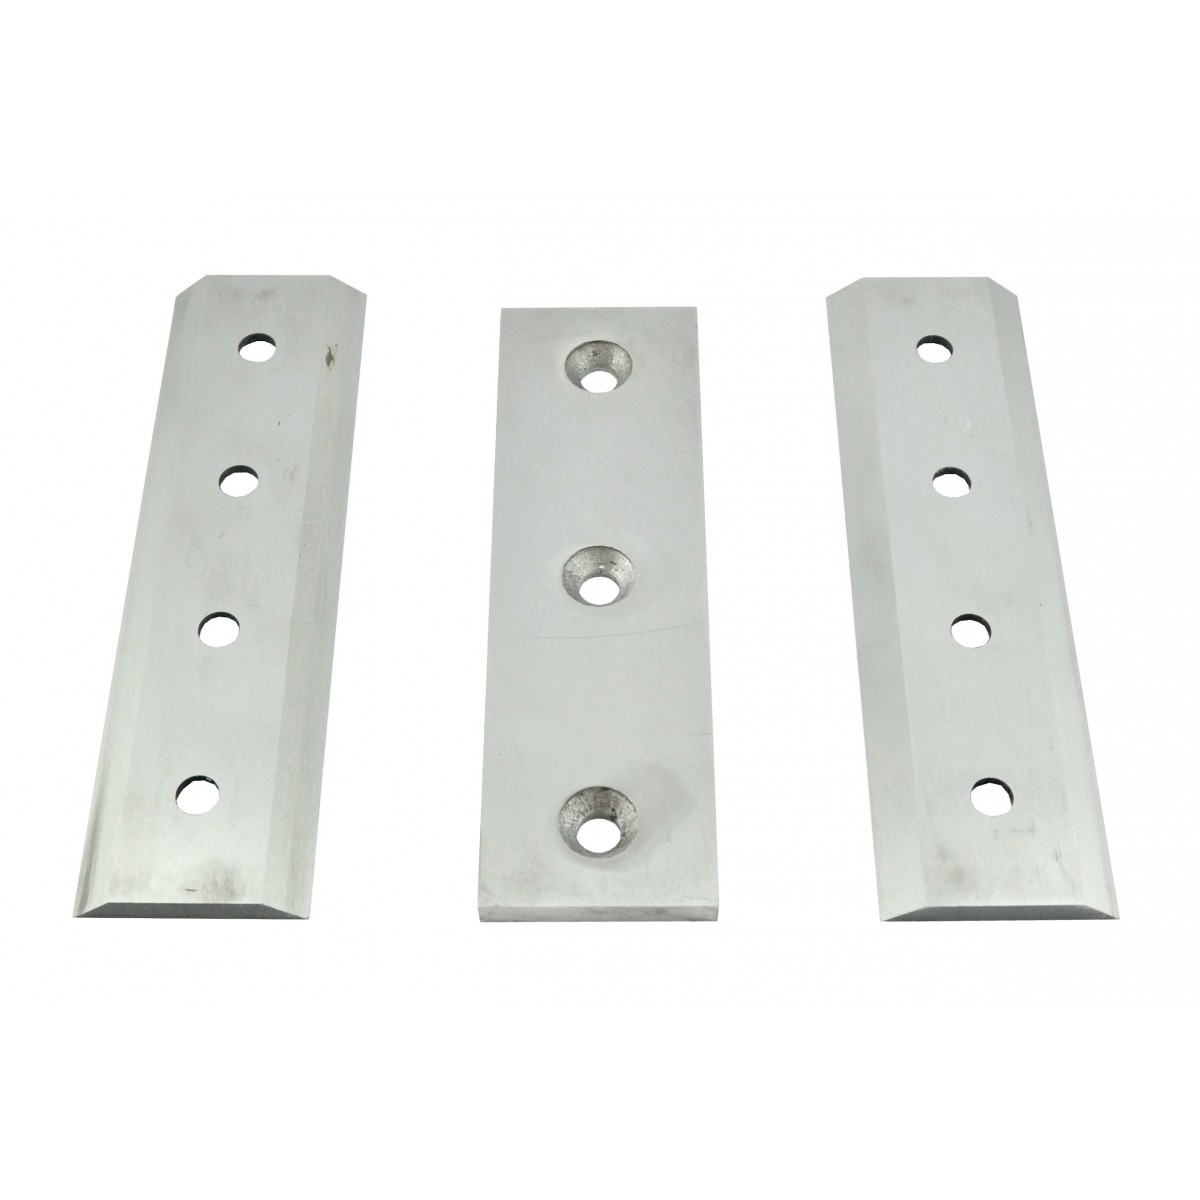 Knives for chipper BX42 and TH8 - set of 3